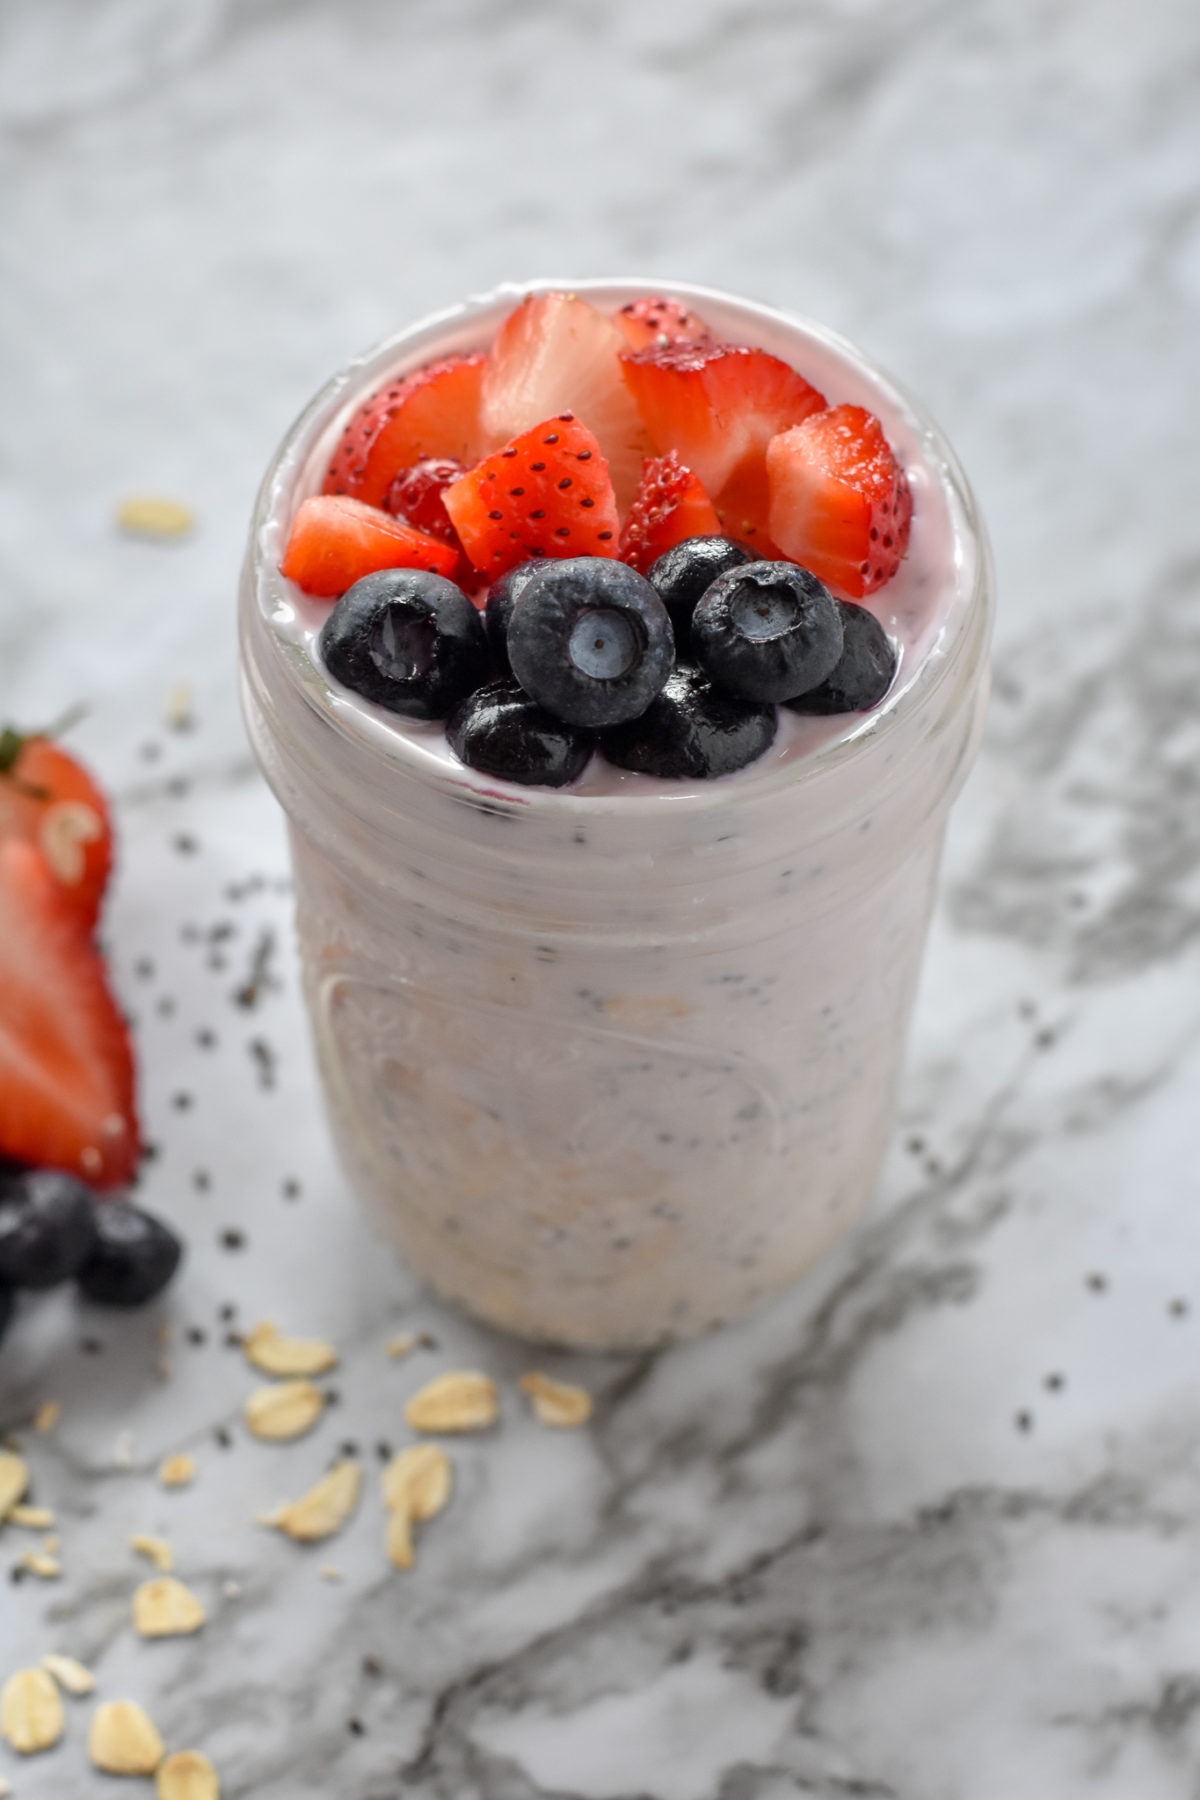 Overnight Oats with Yogurt and Berries pack tons of flavor and protein into your breakfast with only a few minutes preparation the night before! Make these today.